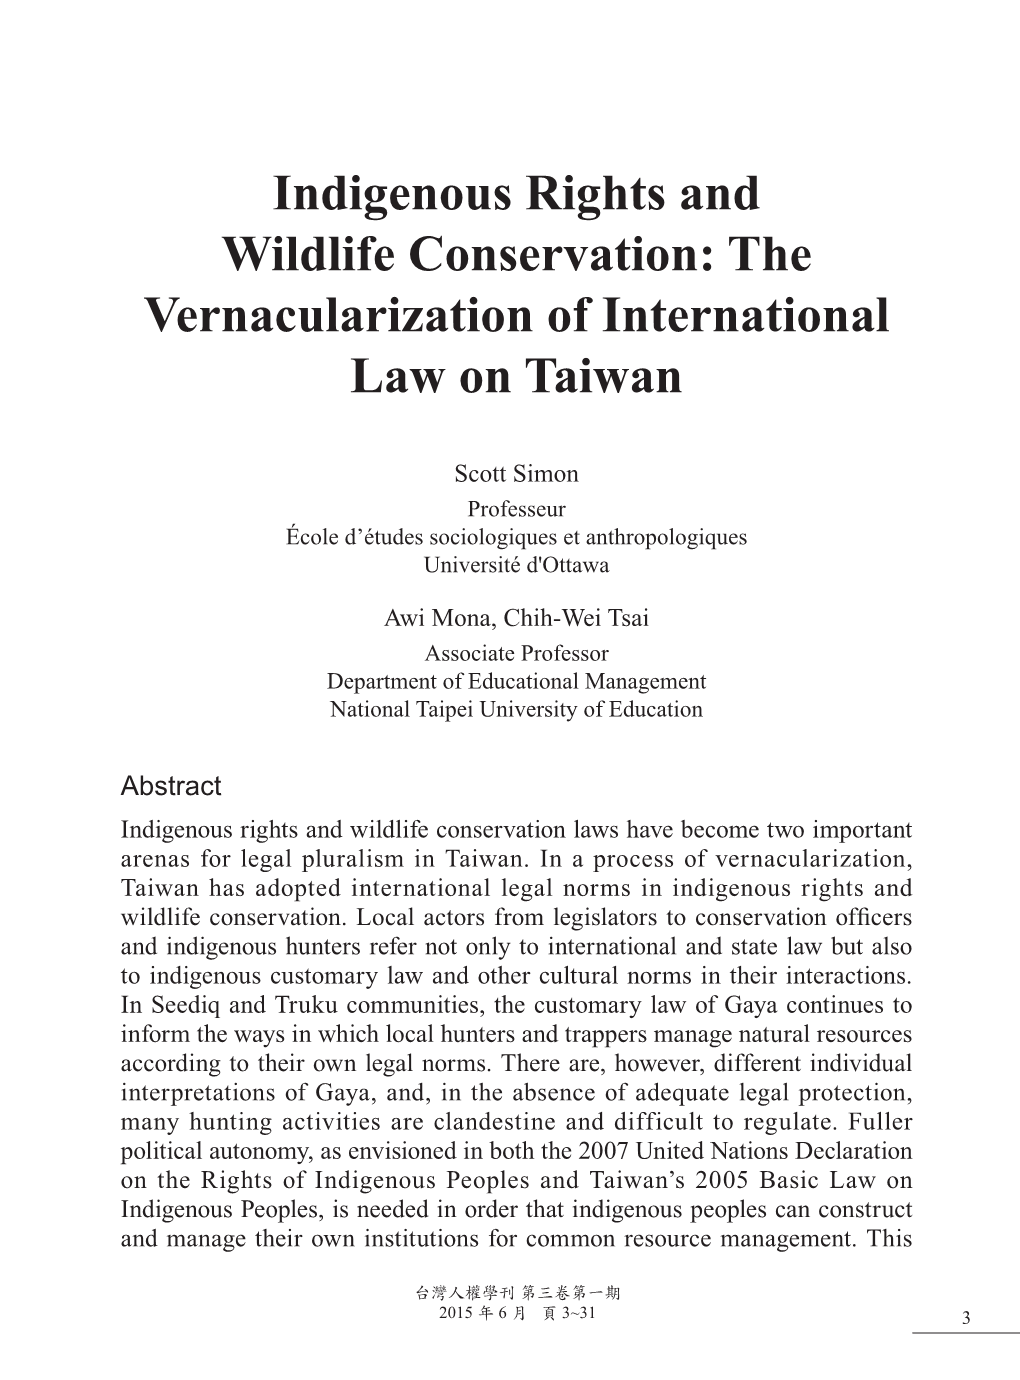 Indigenous Rights and Wildlife Conservation: the Vernacularization of International Law on Taiwan